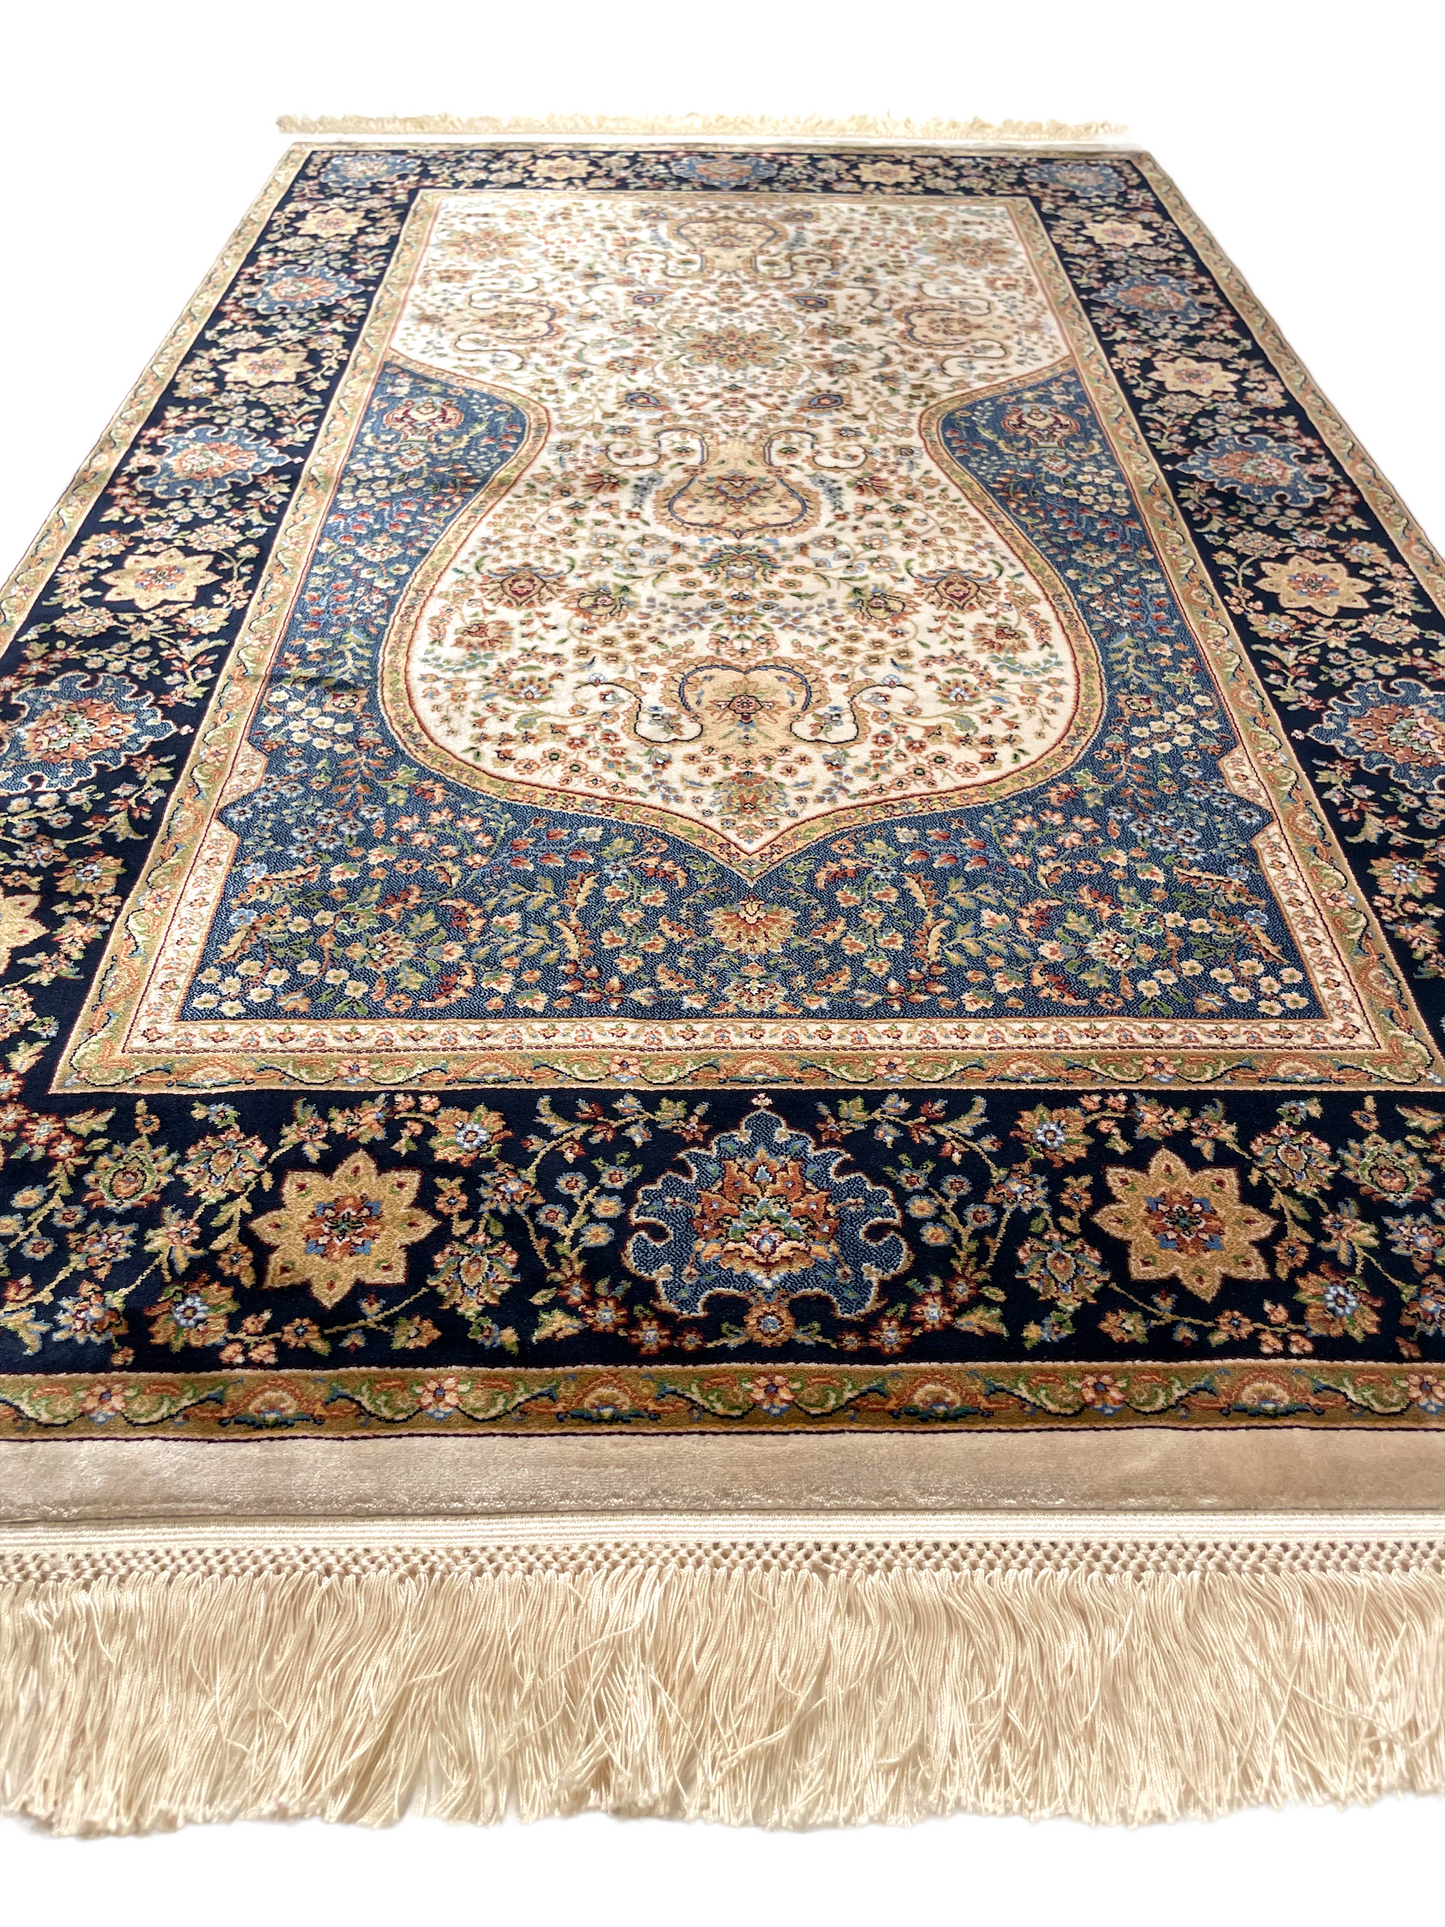 The Himma rug displays the traditional Islamic "mihrab" design with elegant floral elements. 